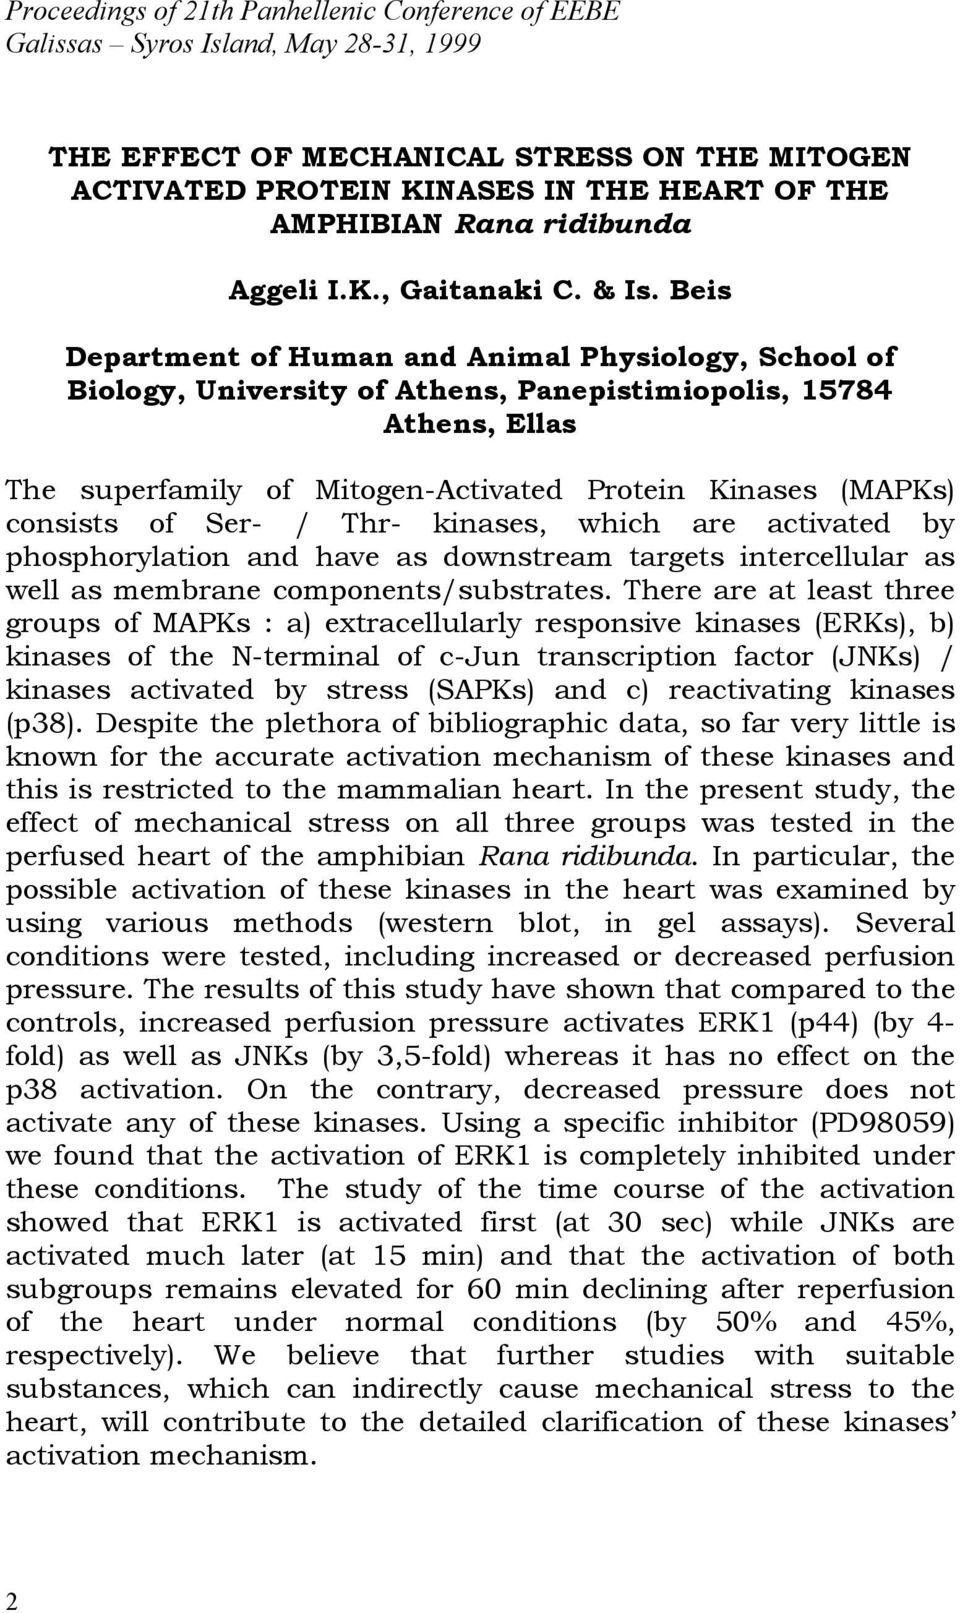 Beis Department of Human and Animal Physiology, School of Biology, University of Athens, Panepistimiopolis, 15784 Athens, Ellas The superfamily of Mitogen-Activated Protein Kinases (MAPKs) consists